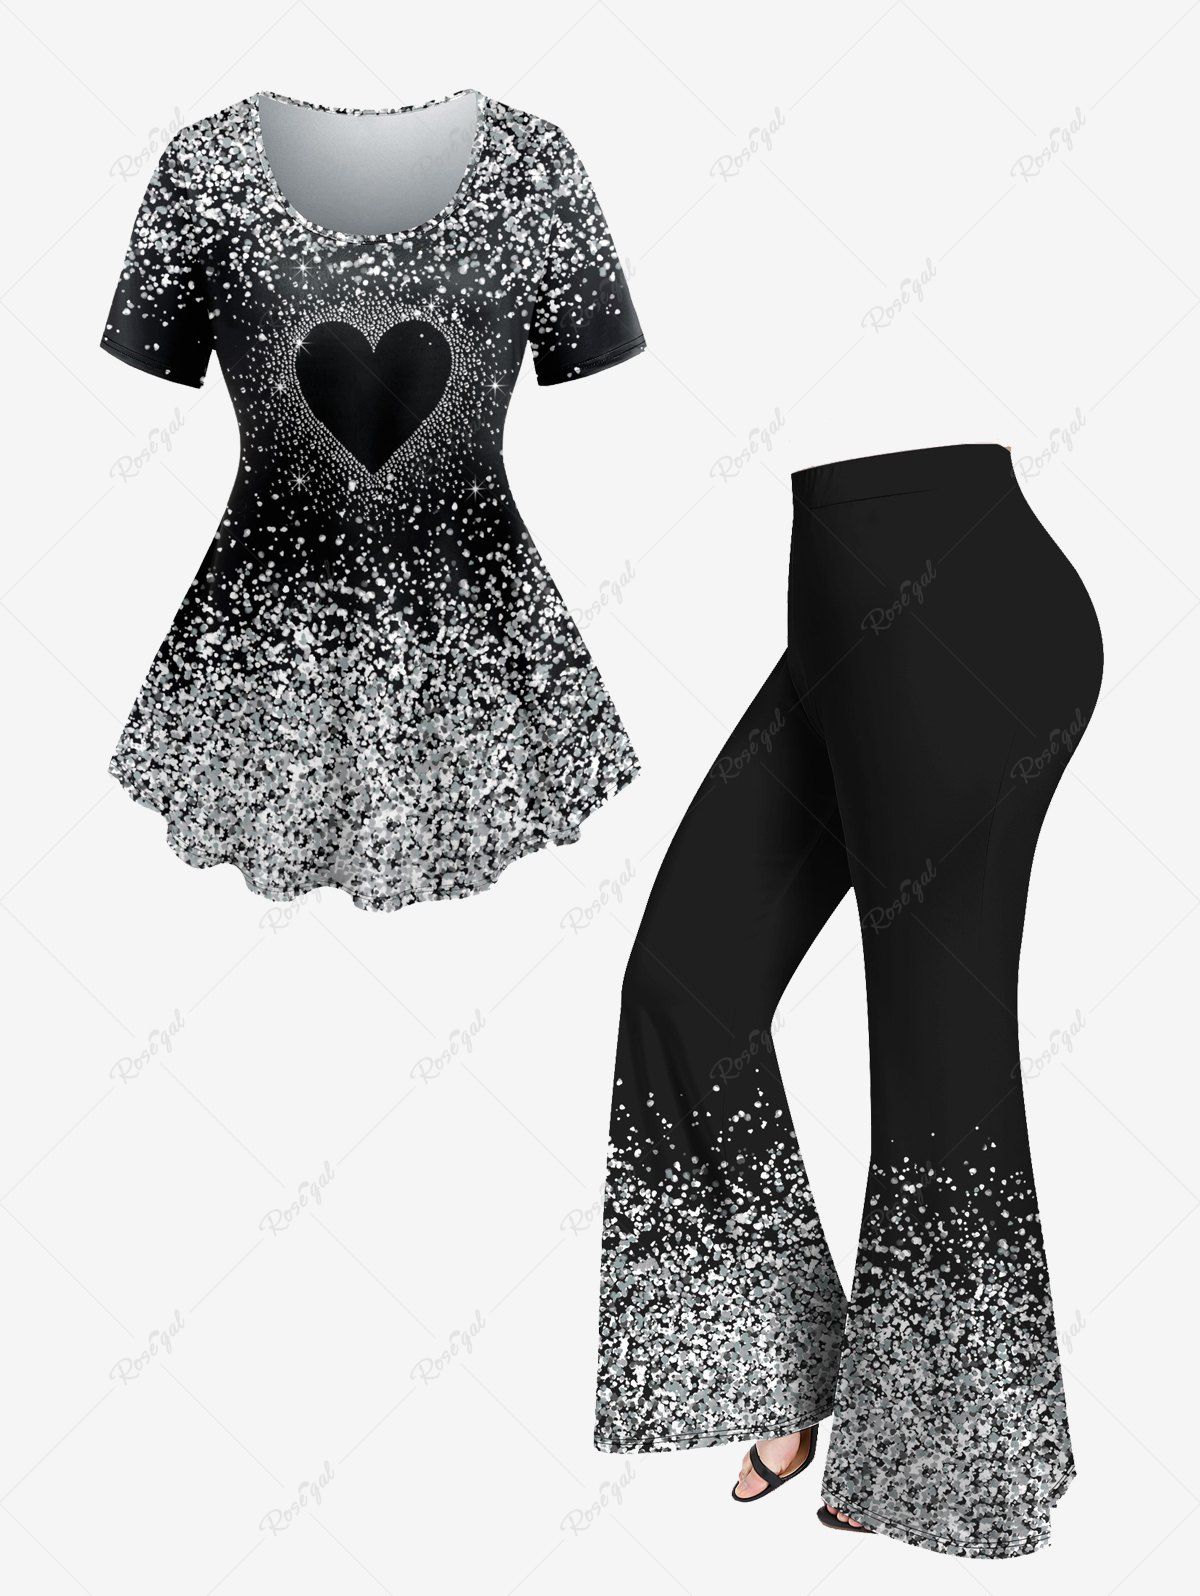 Outfits Glitter Heart Printed Short Sleeves Tee and Flare Pants Plus Size Disco 70s 80s Outfits  